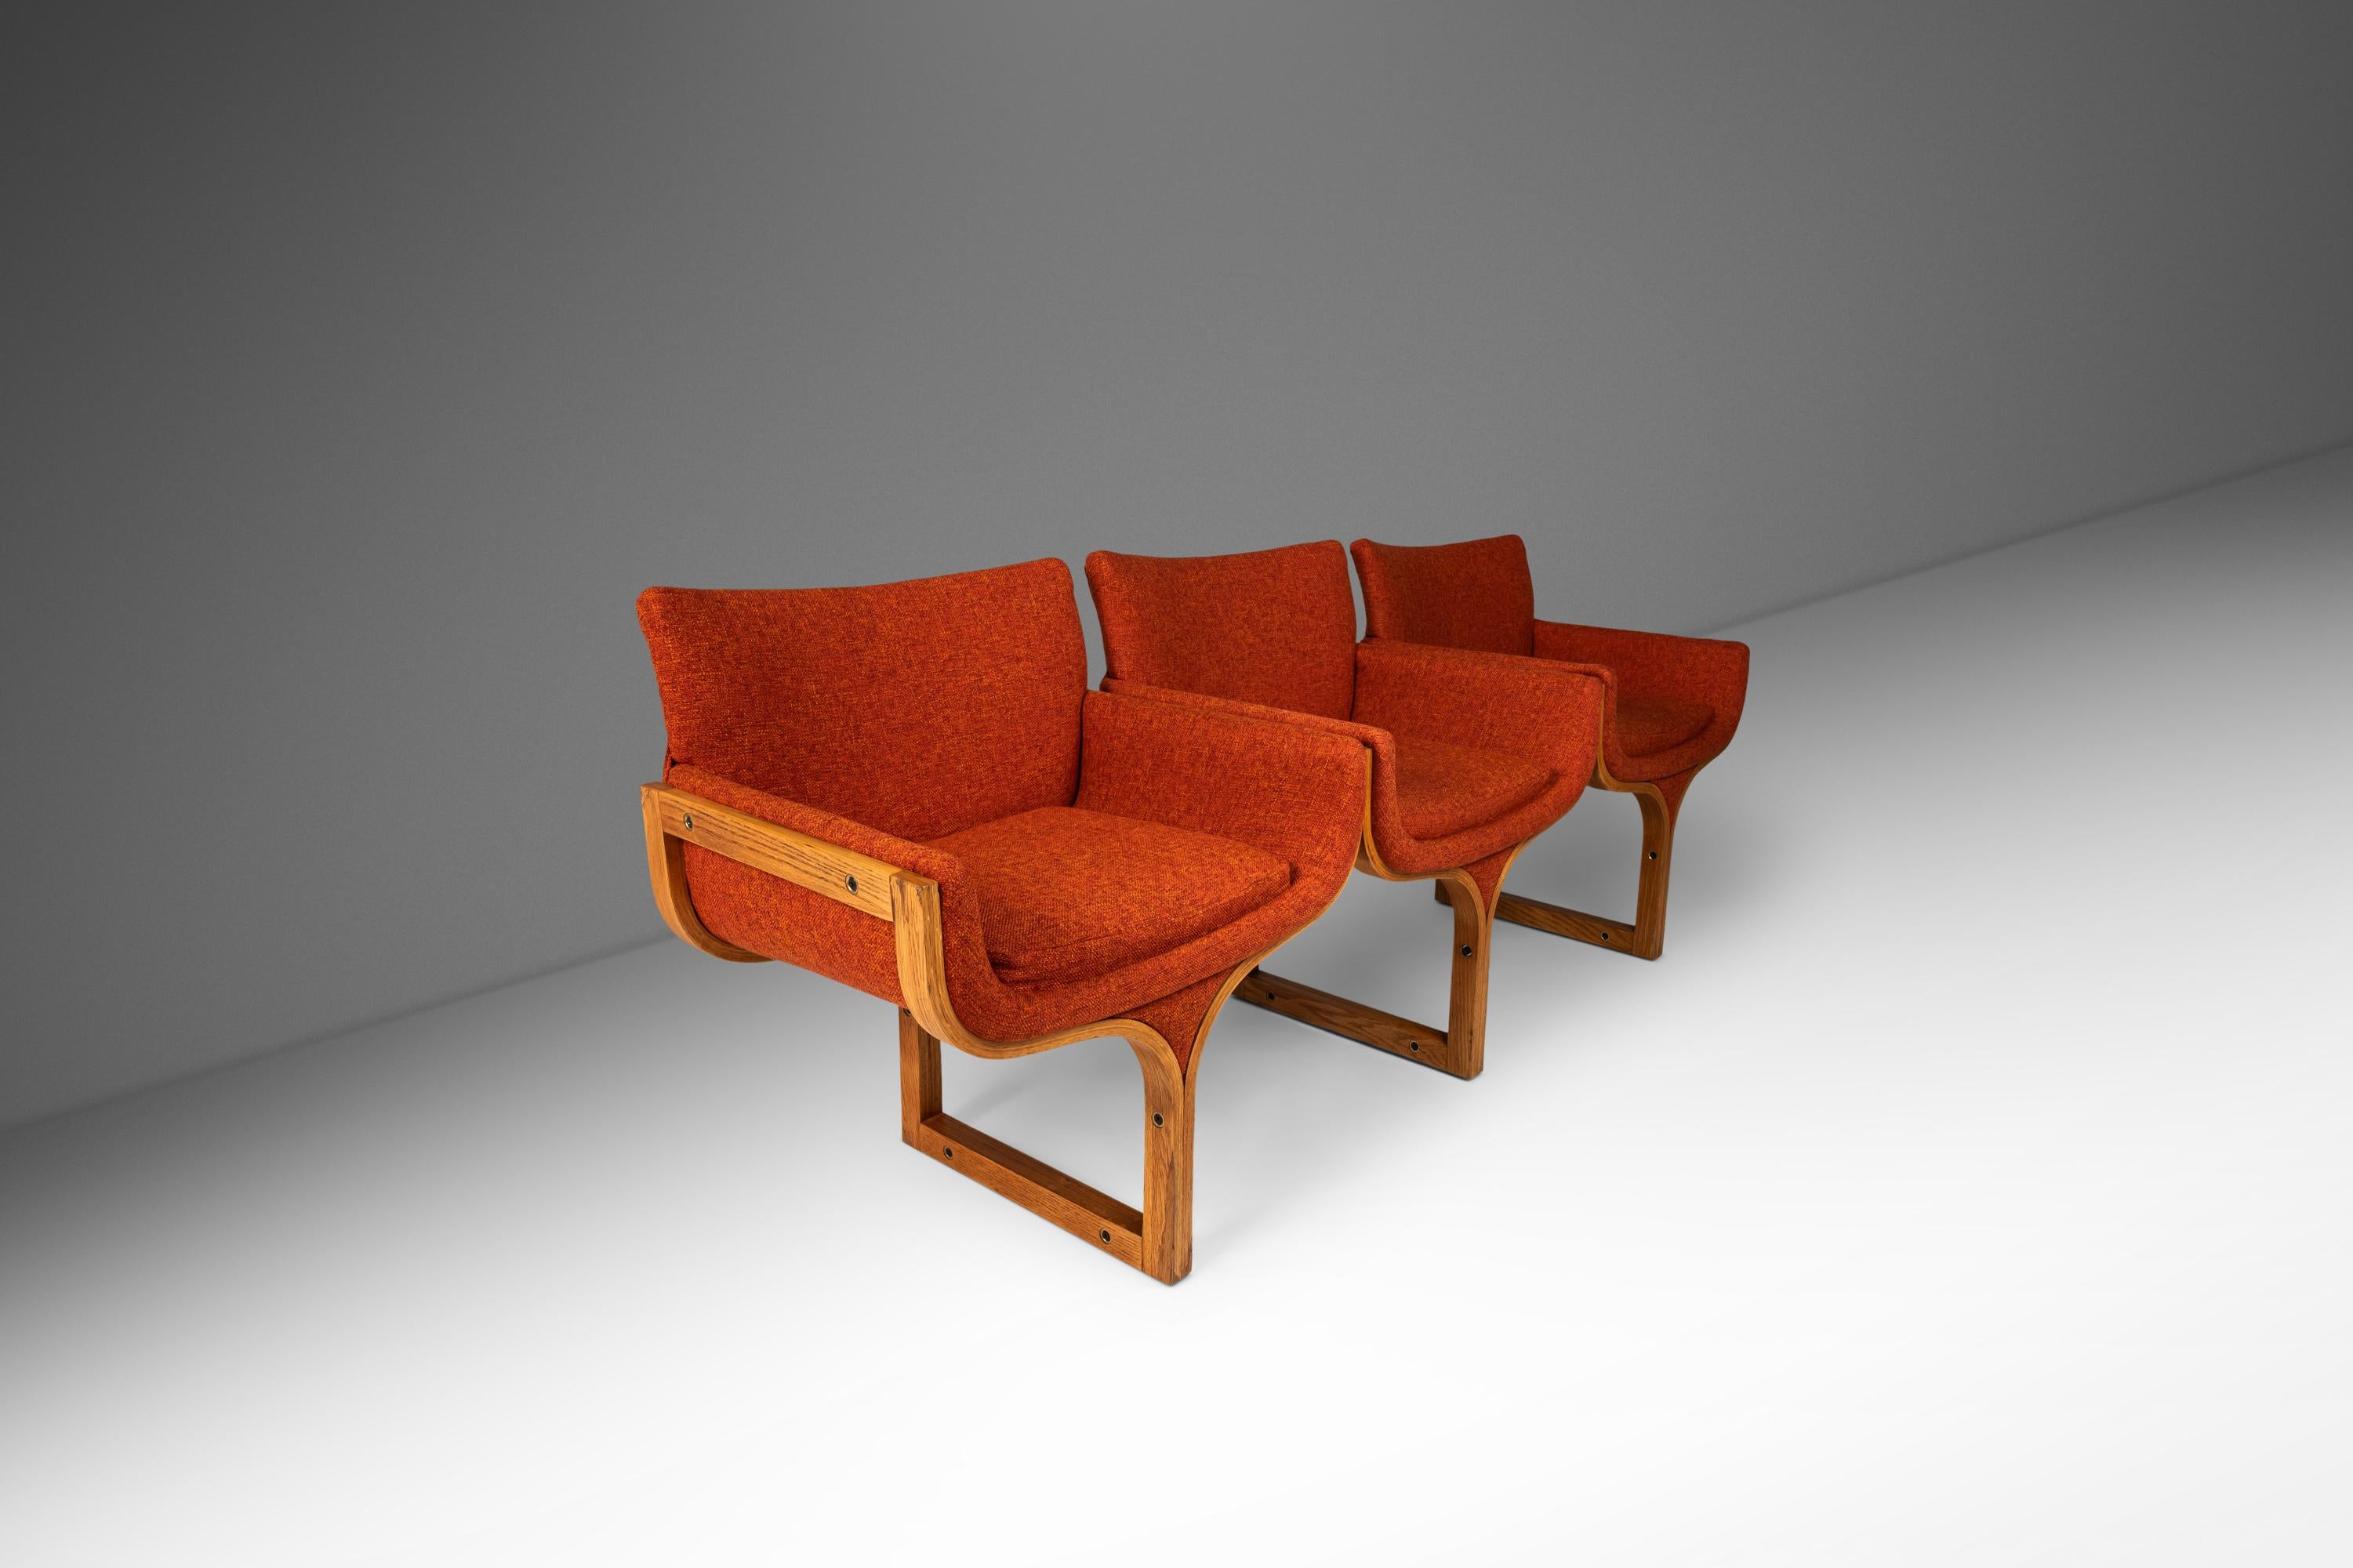 The Three Seat Architectural Bench by Arthur Umanoff for Madison Furniture is a stunning example of mid century modern design. Constructed from laminated oak plywood and newly upholstered in a muted tangerine knit fabric, this piece has been fully